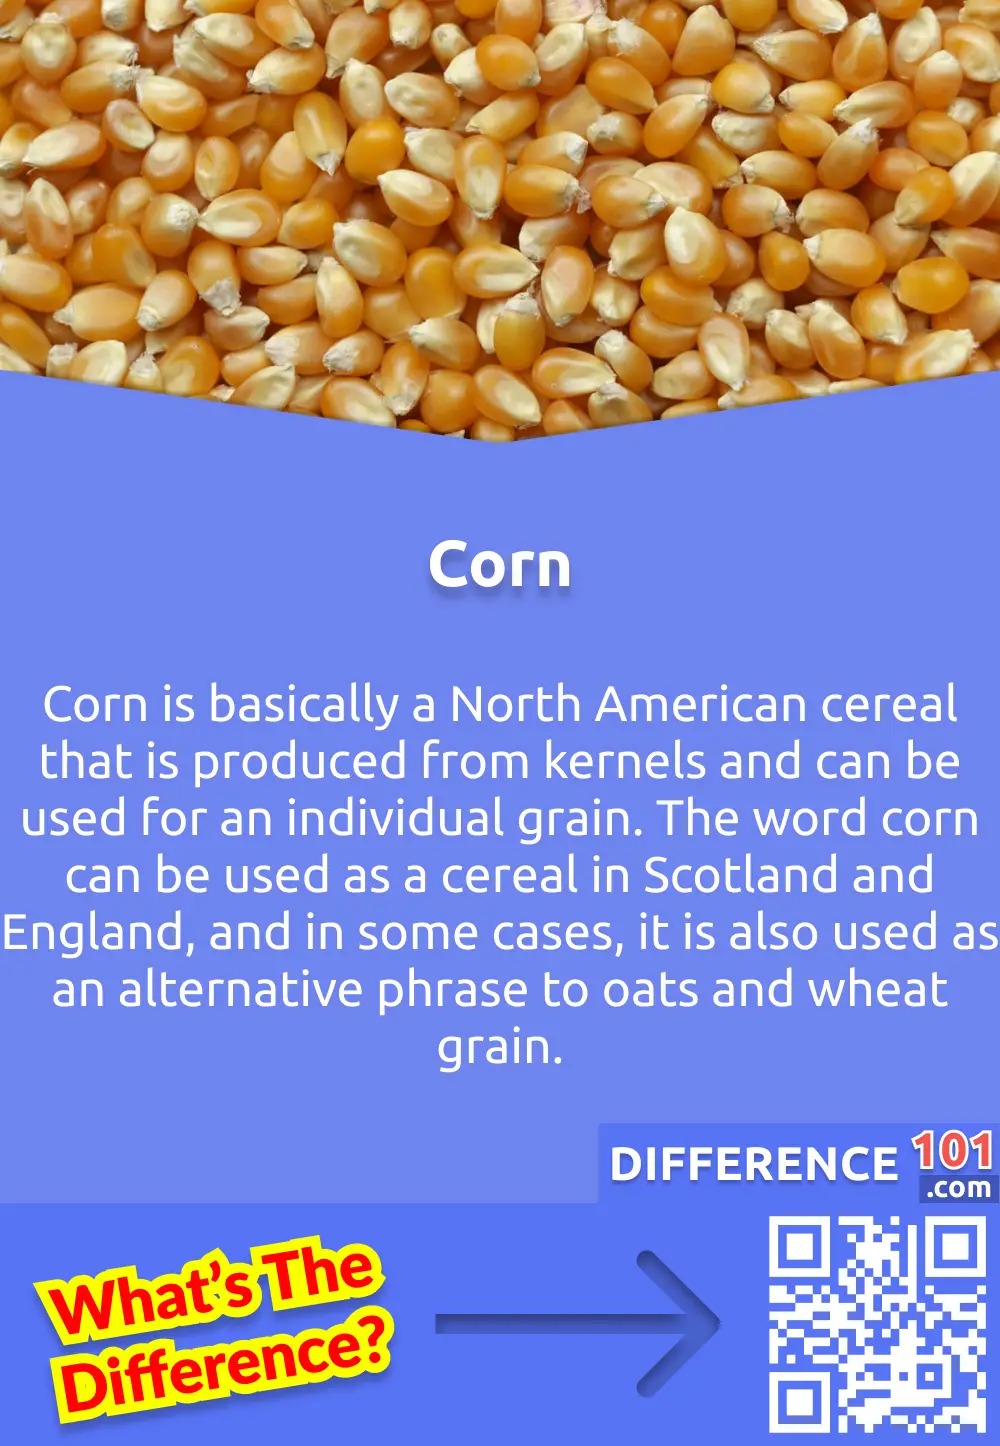 What is Corn? Corn is basically a North American cereal that is produced from kernels and can be used for an individual grain. The word corn can be used as a cereal in Scotland and England, and in some cases, it is also used as an alternative phrase to oats and wheat grain.